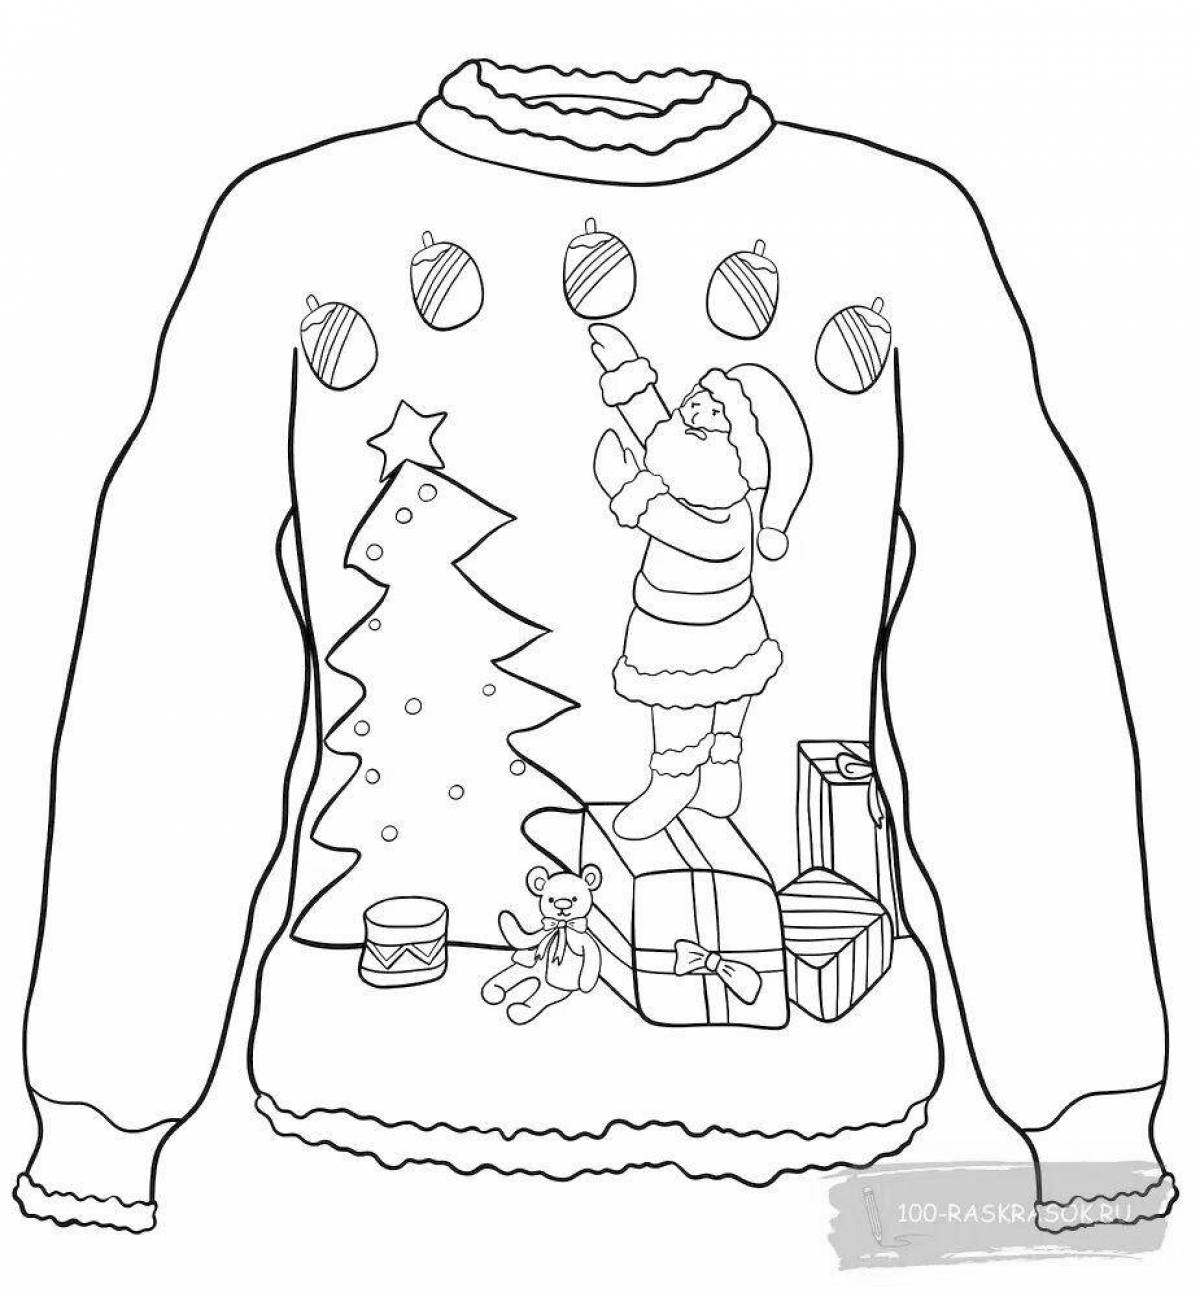 Colourful Christmas sweater coloring page